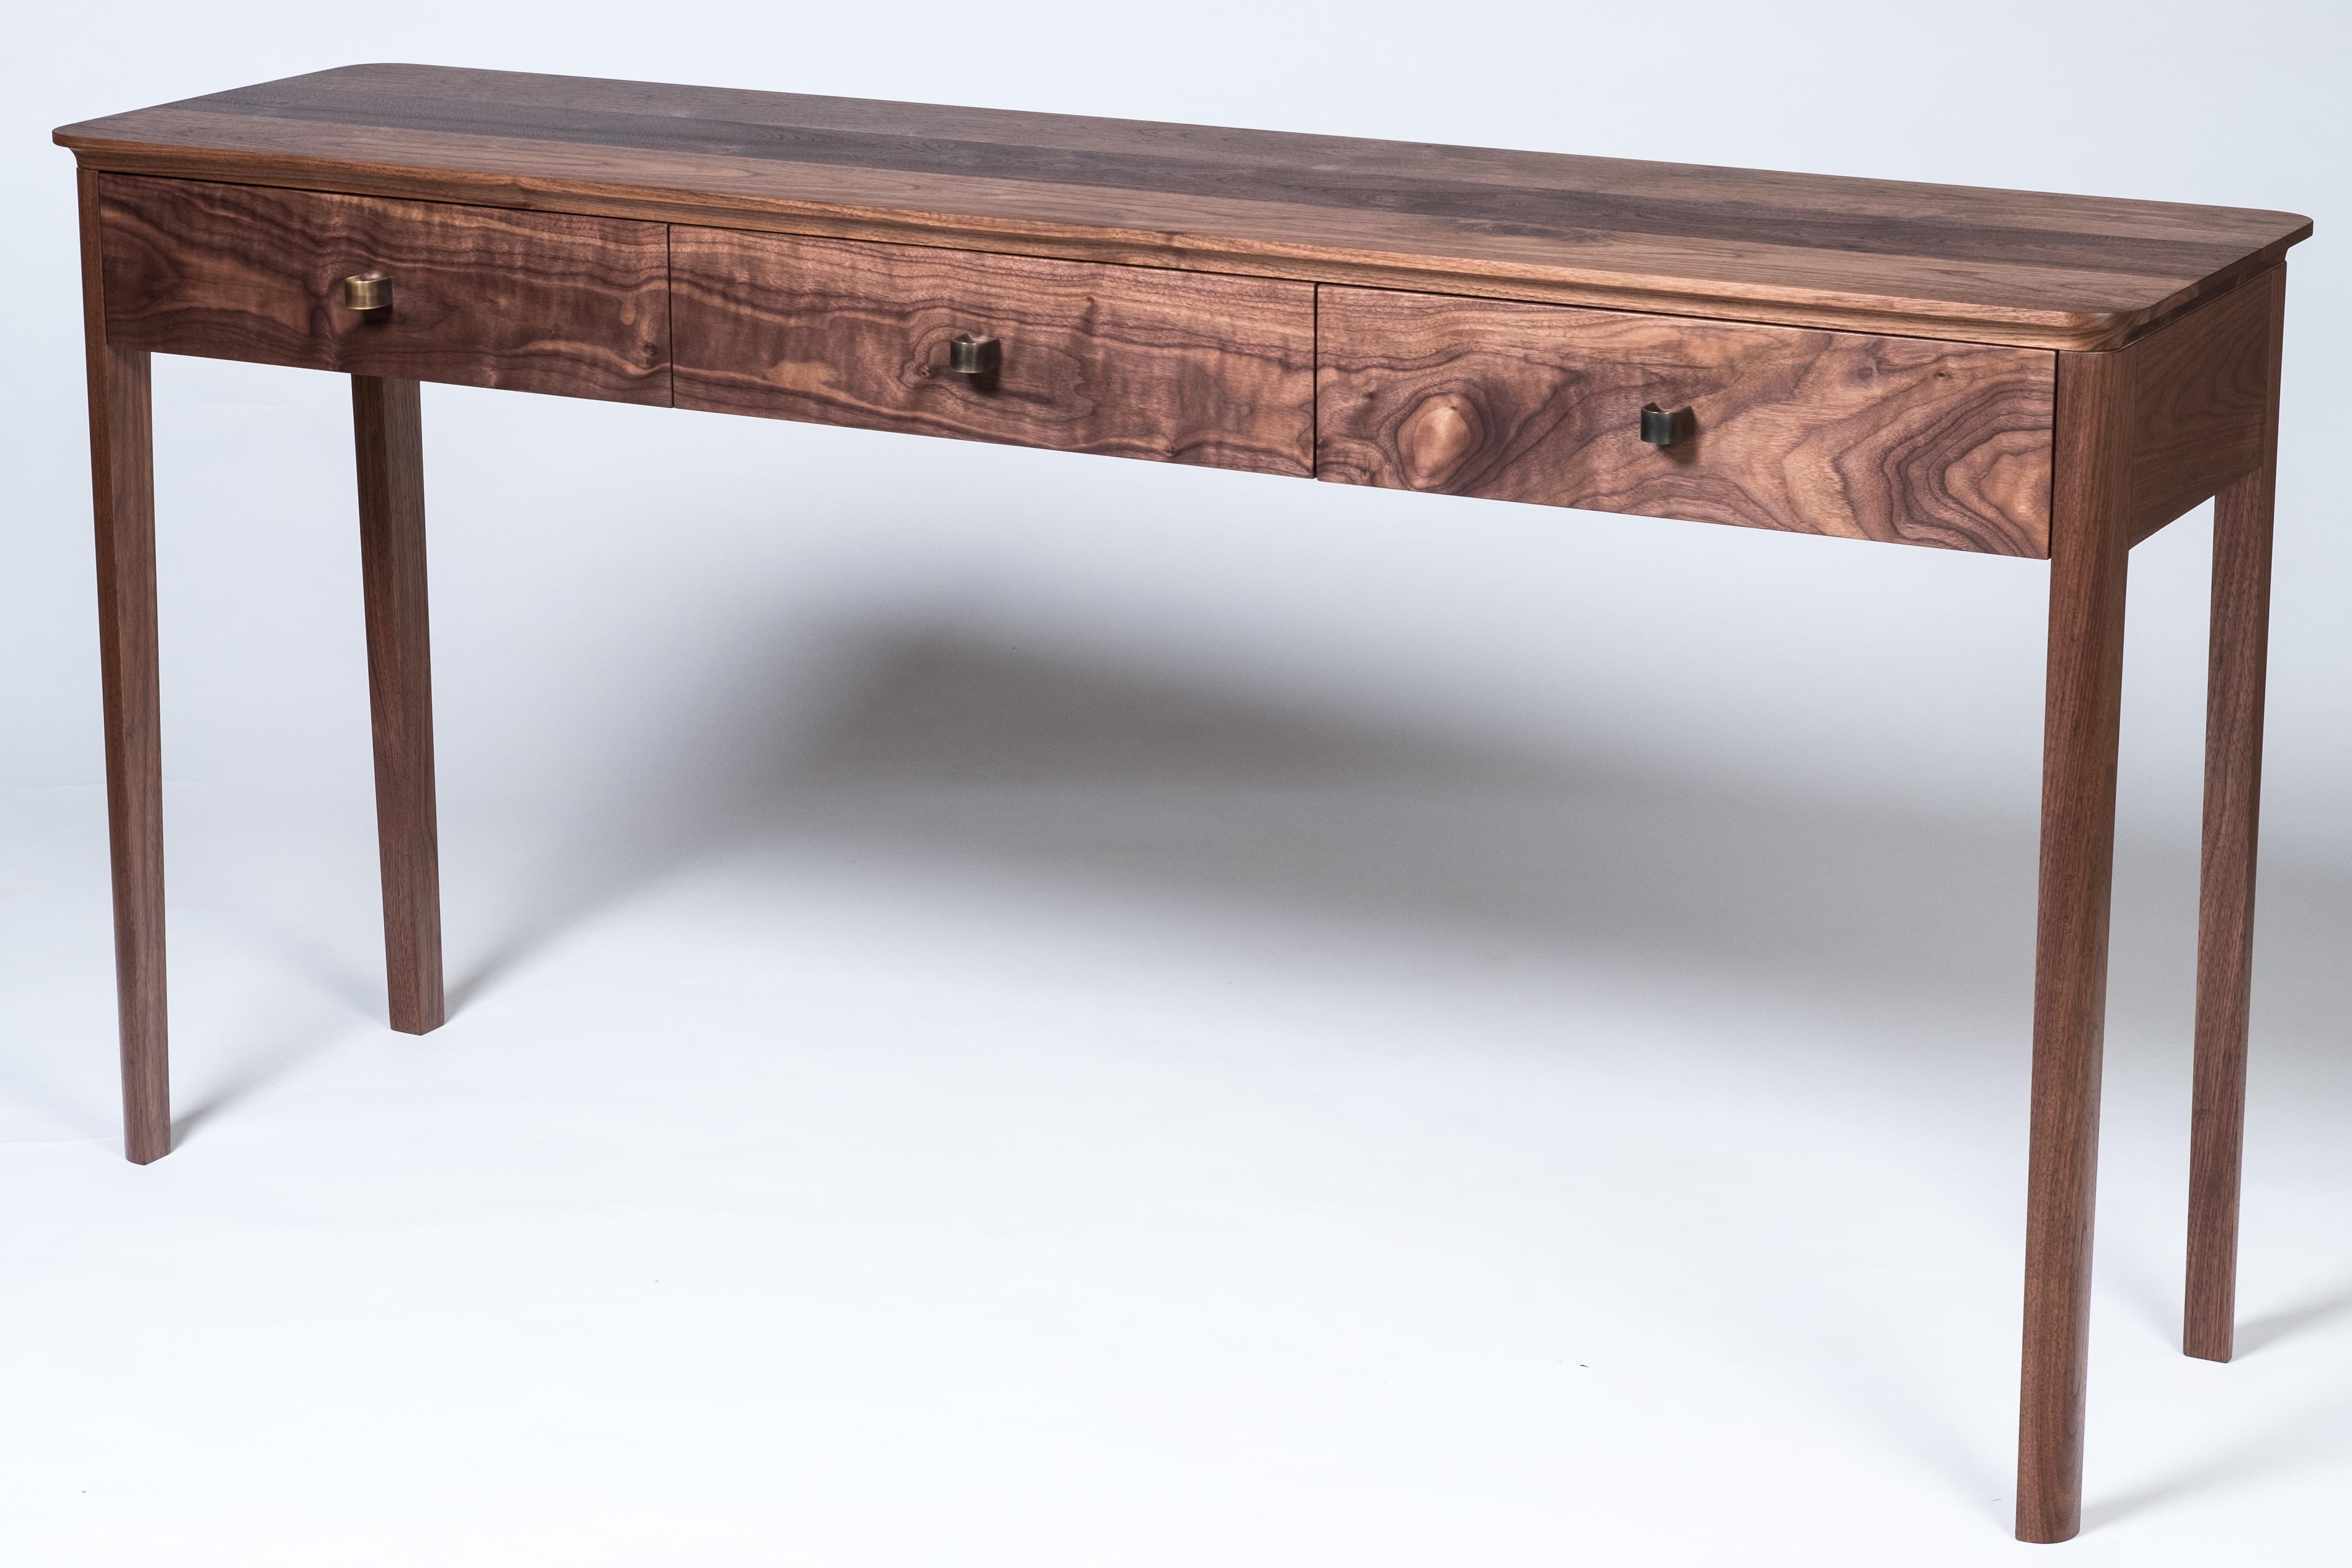 Hand-Crafted Basin Console Table in Walnut by Tretiak Works, Modern Contemporary Hall Sofa For Sale